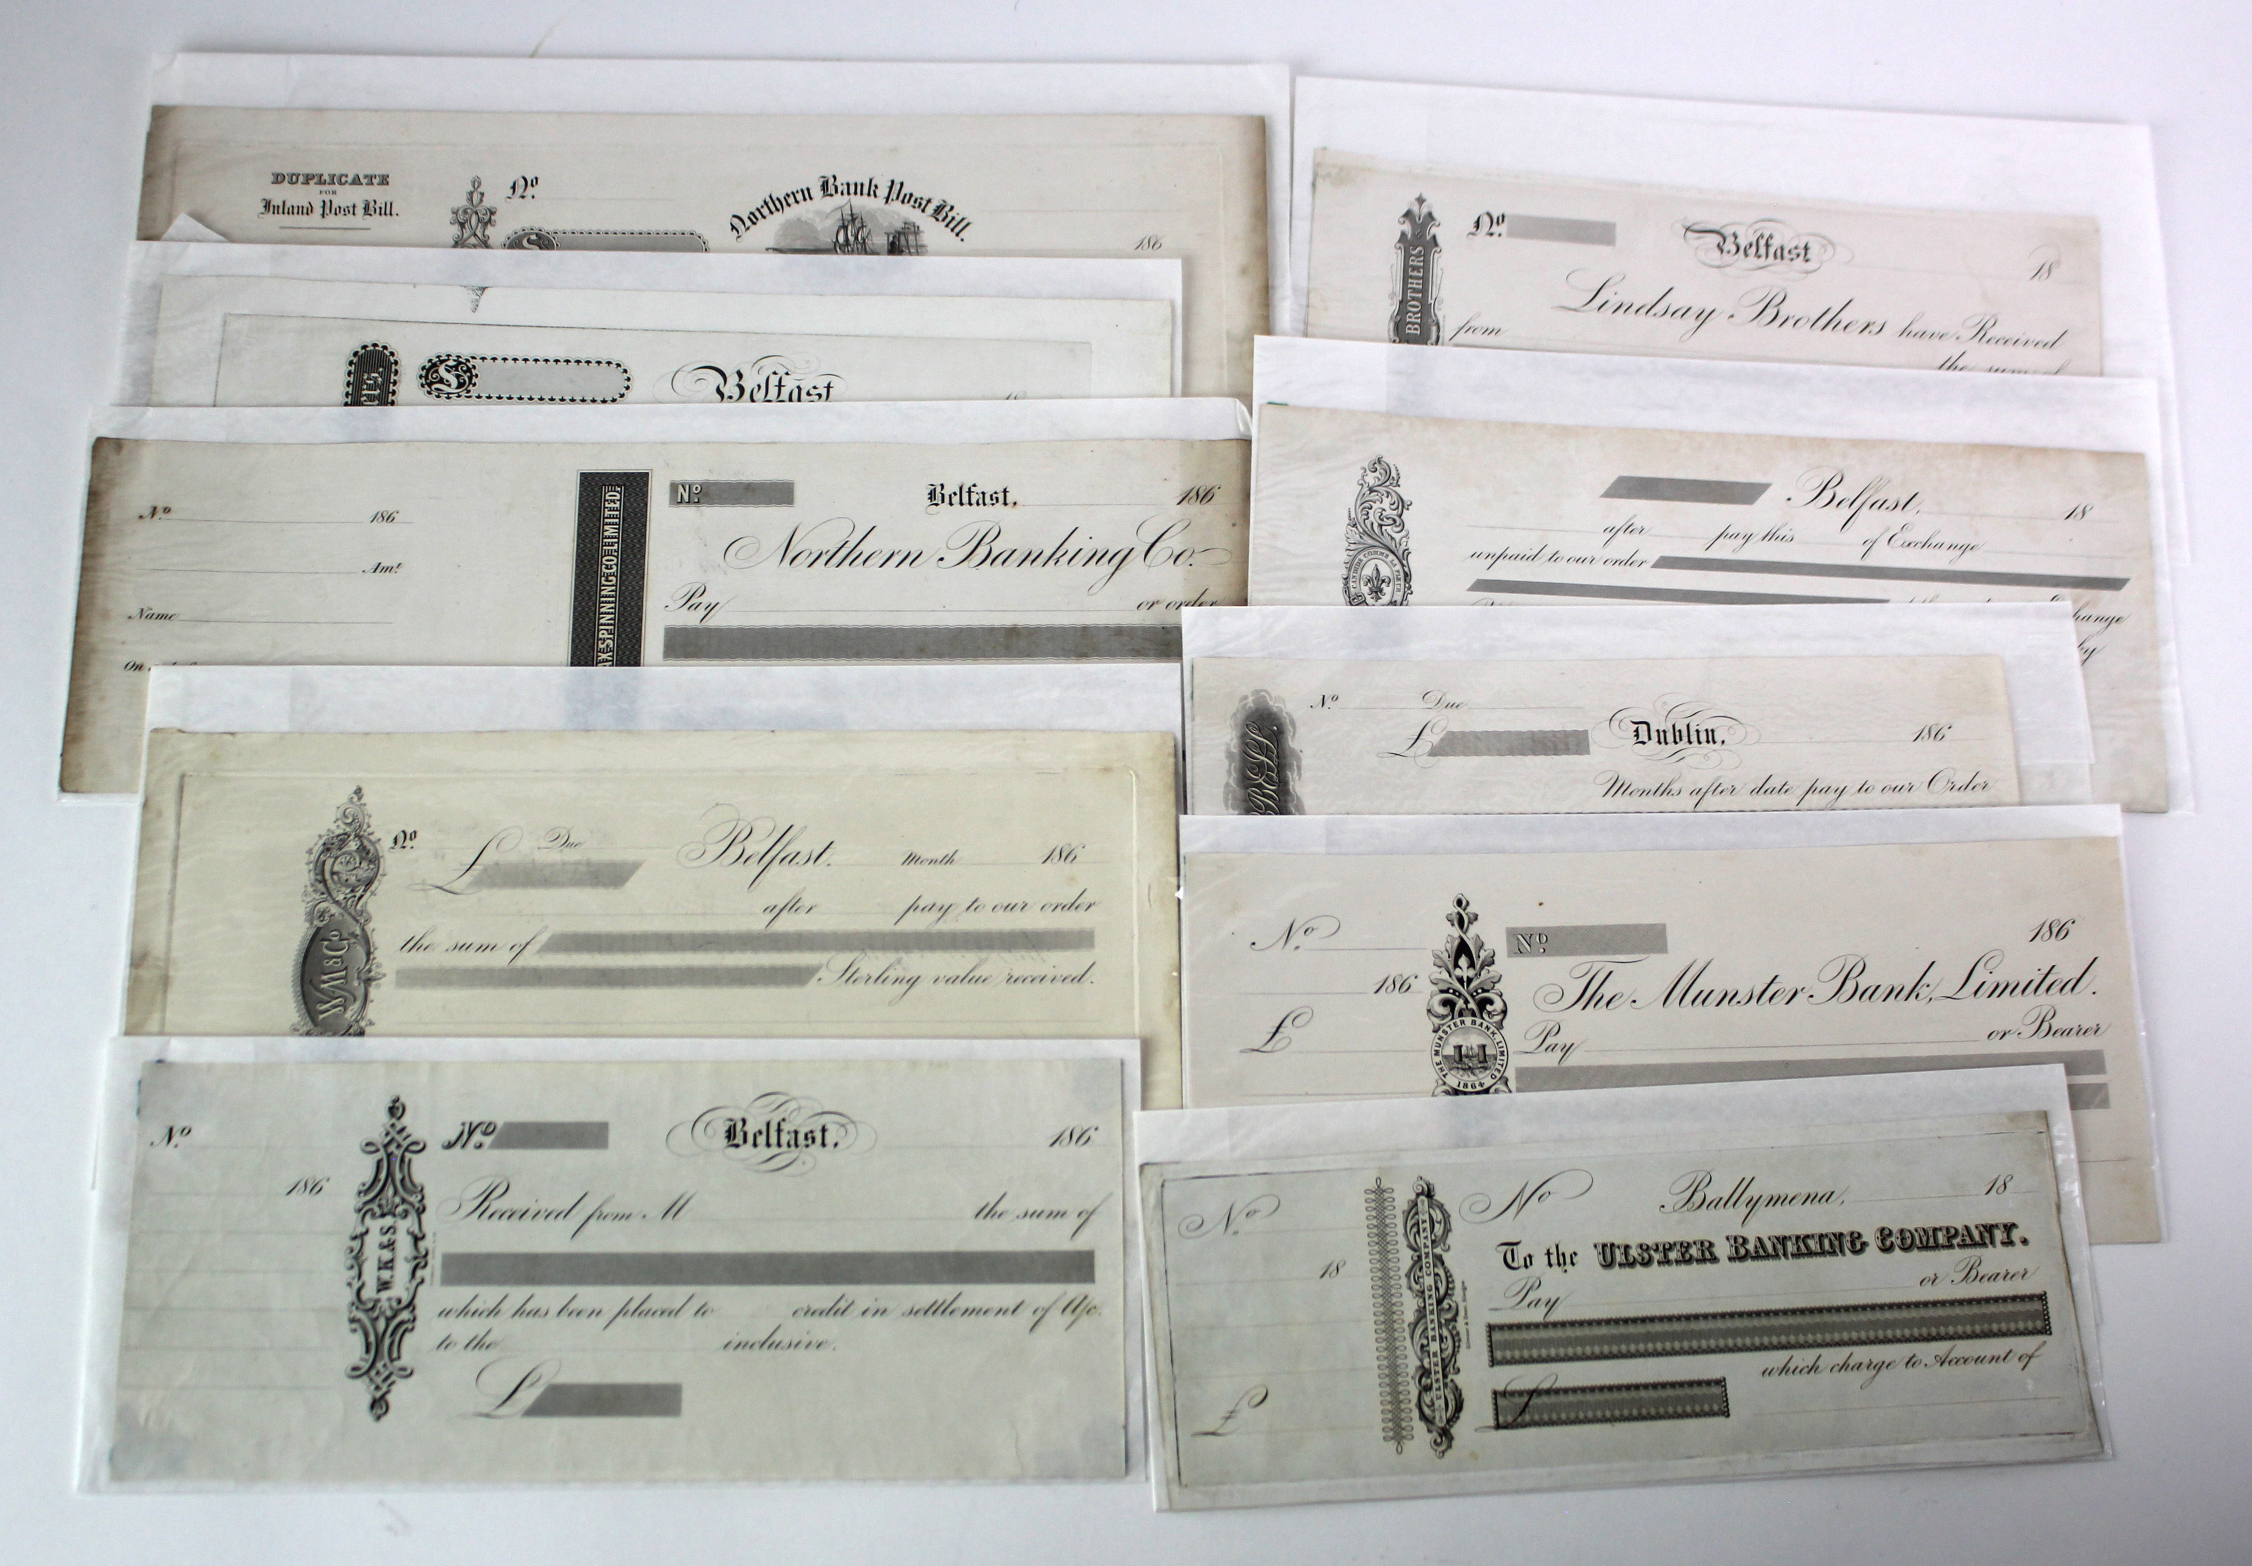 Ireland (10), a group of early large PROOFS, unissued cheques, bills of exchange and other banking